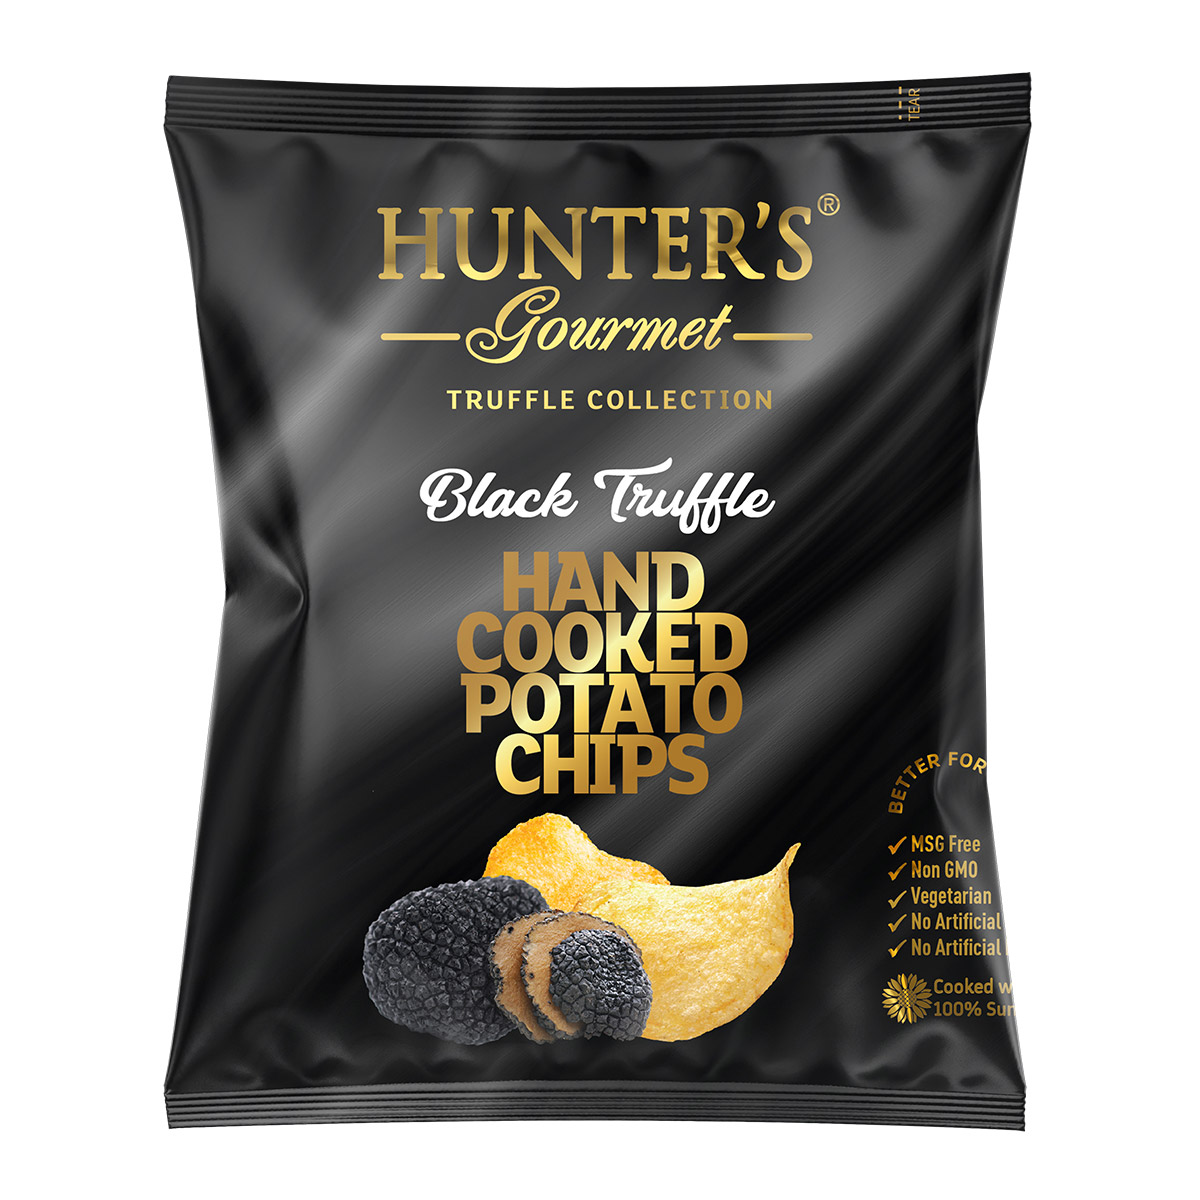 Hunter’s Gourmet Hand Cooked Potato Chips – Black Truffle  – Box – Truffle Collection (40gm)